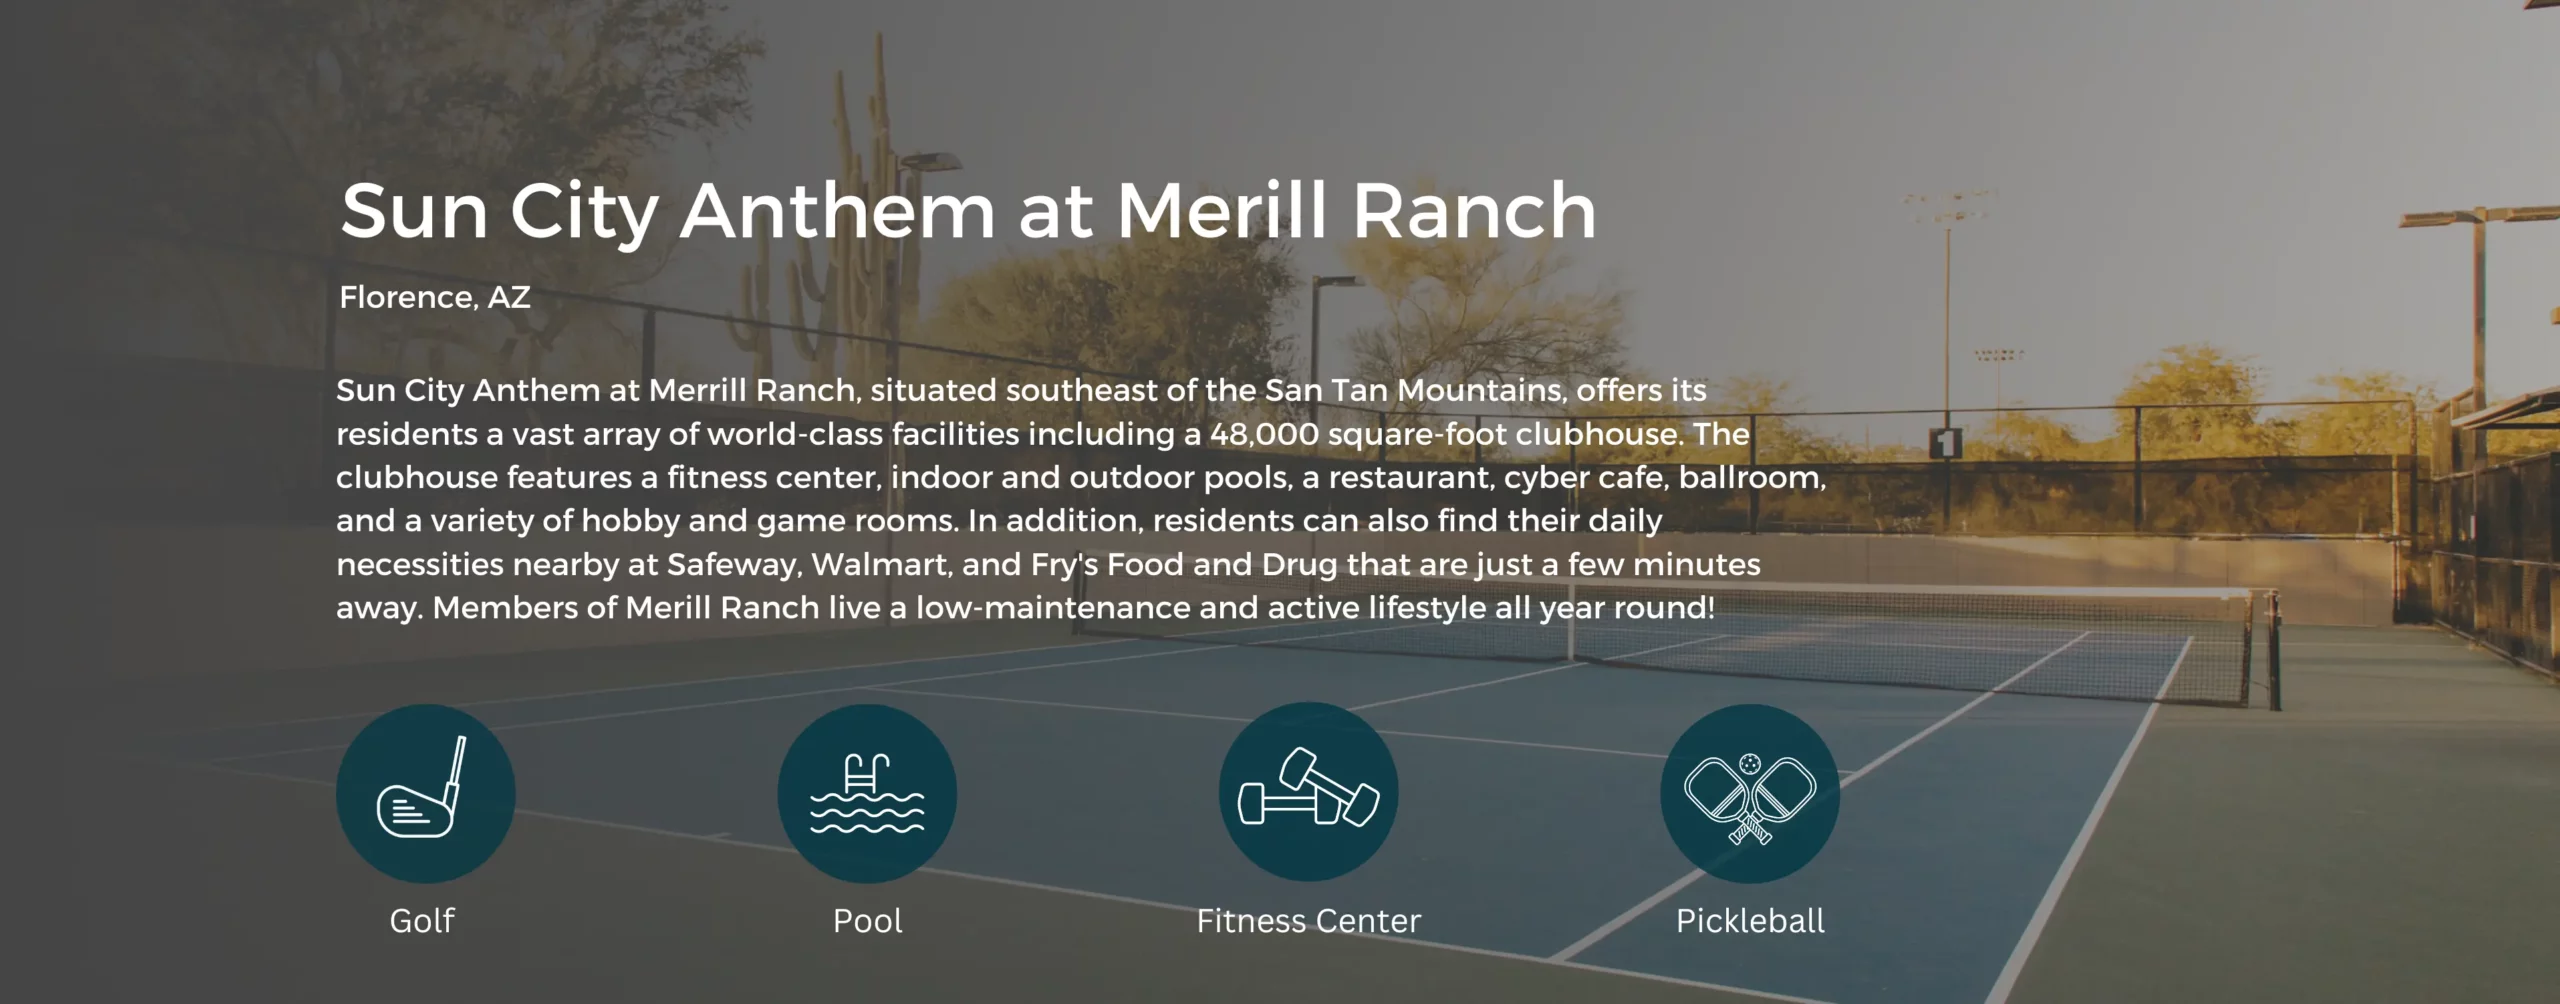 Icons that show Golf, Pool, Fitness Center, and Pickleball. Background image is a tennis court.